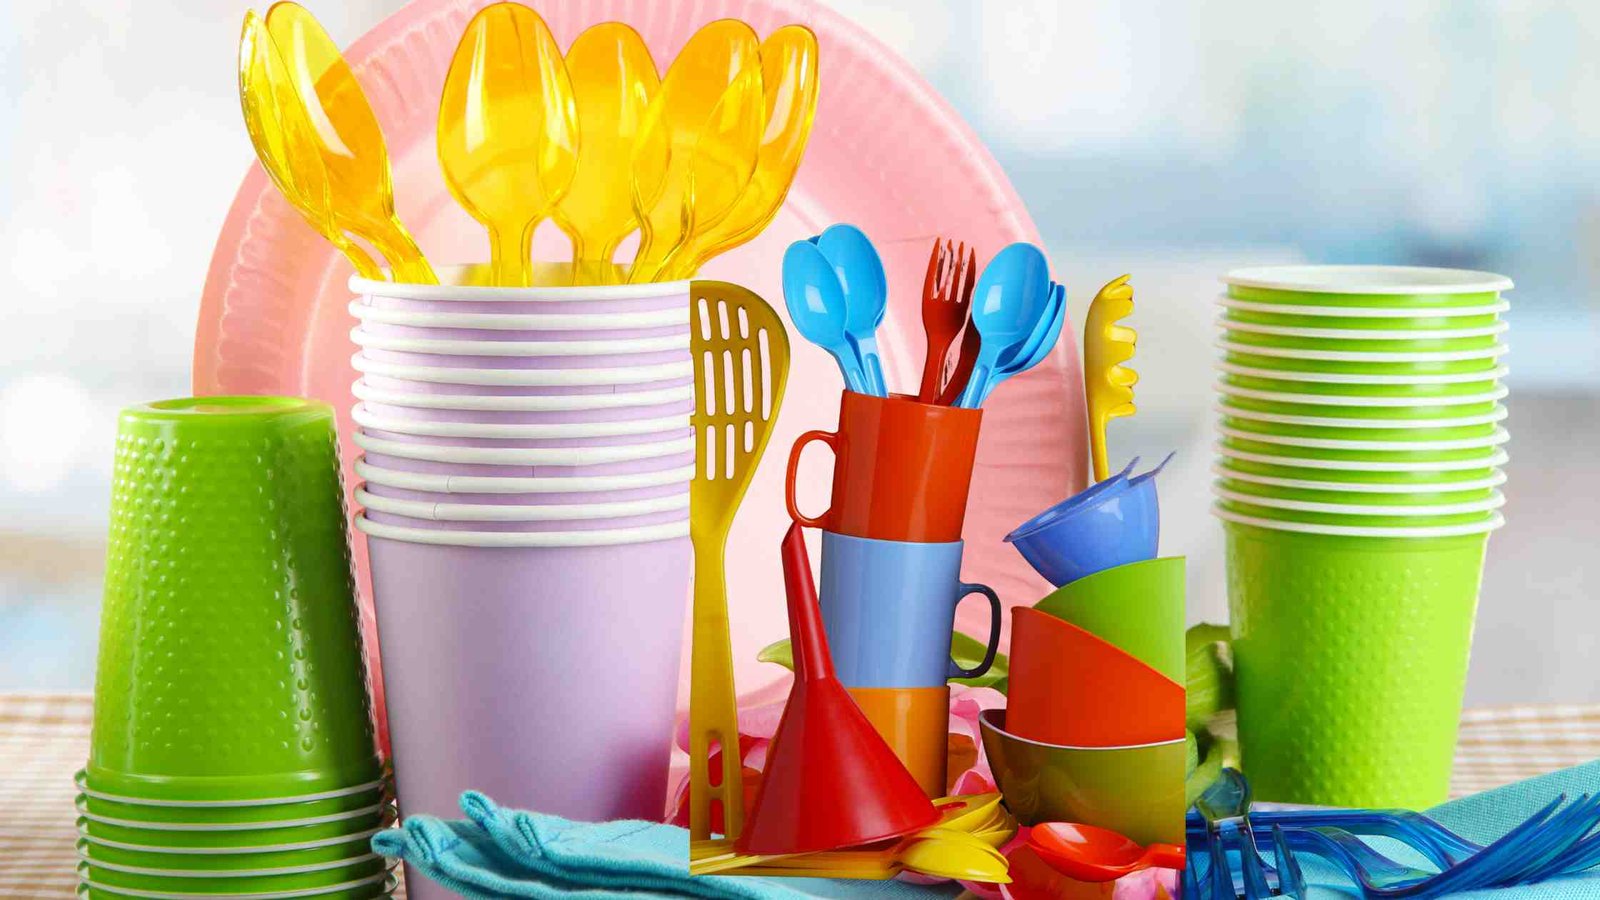 List of 20 Plastic Kitchenware Items That Your Kitchen Must Have